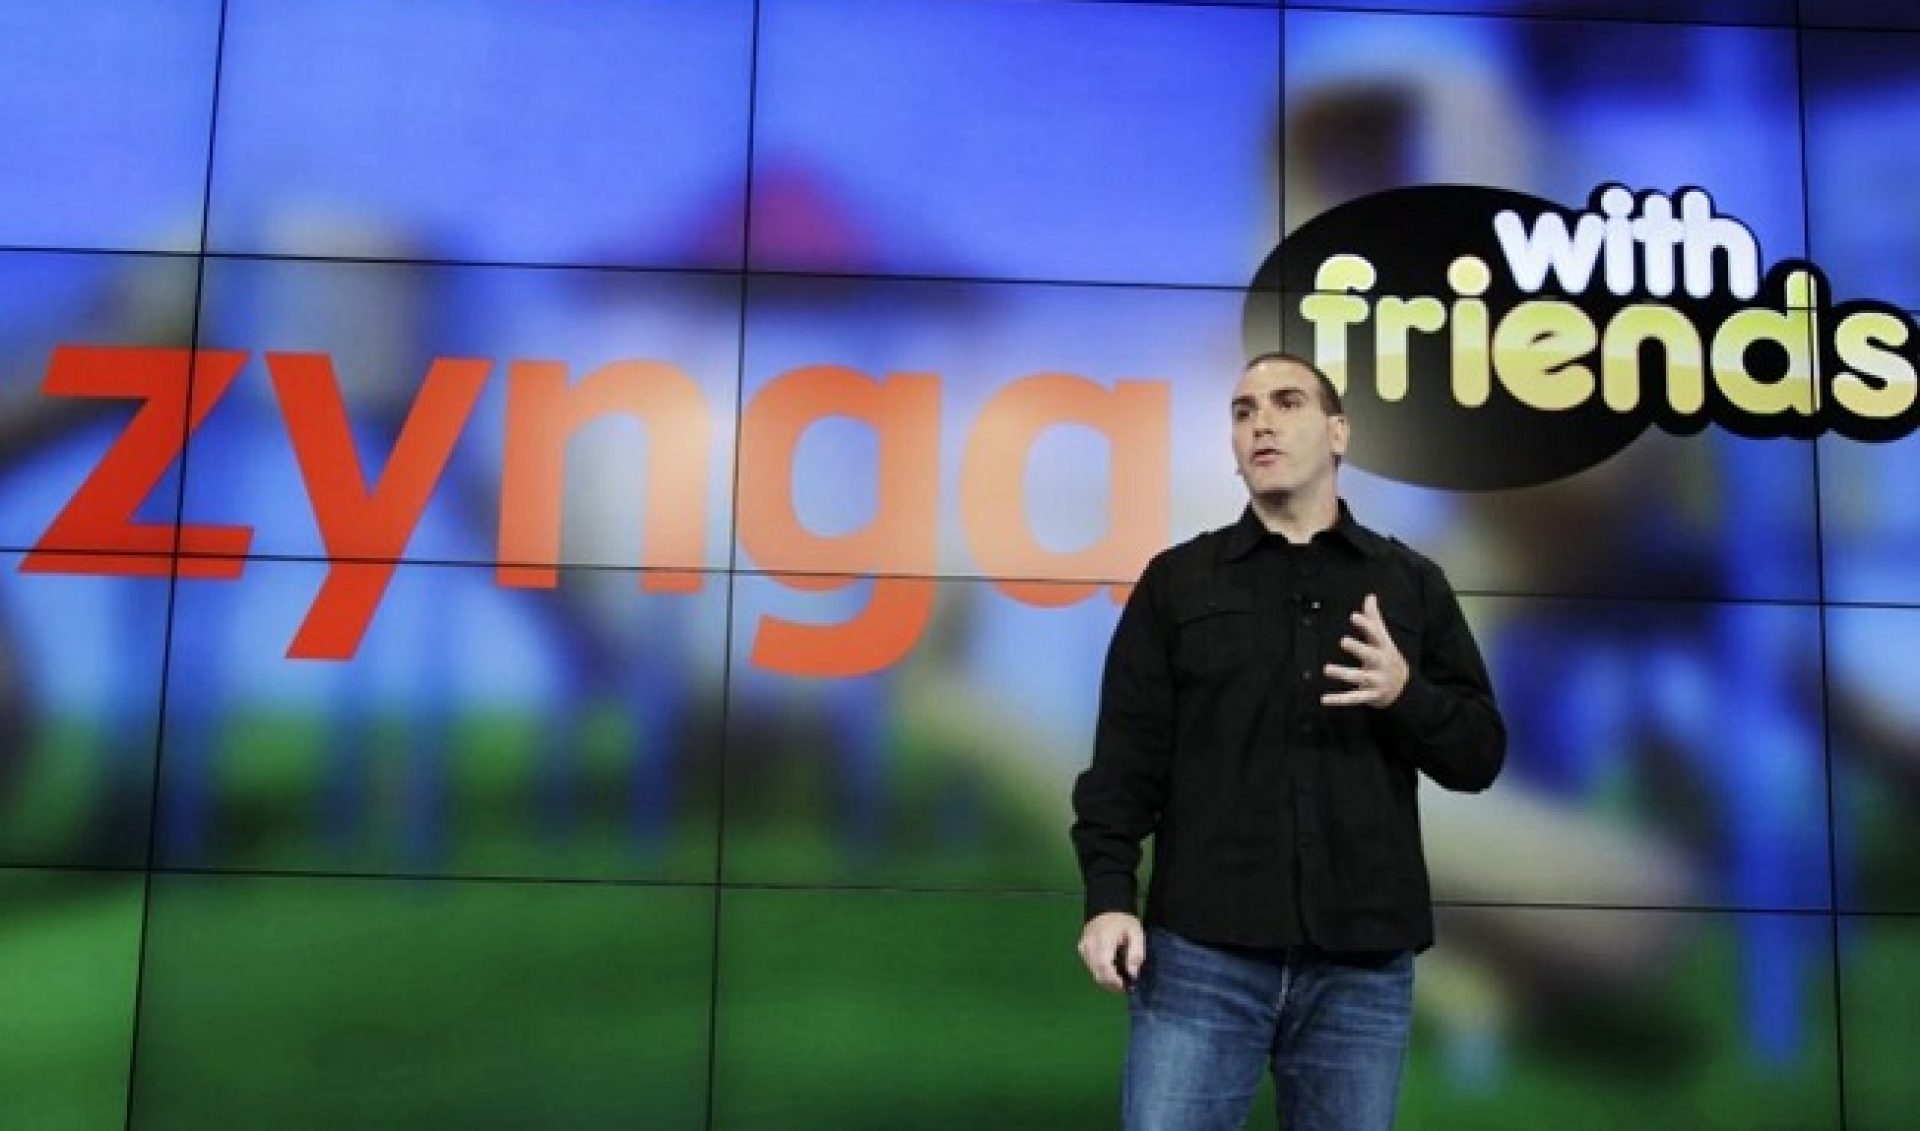 YouTube Snags Manuel Bronstein From Zynga To Fill Product Head Role